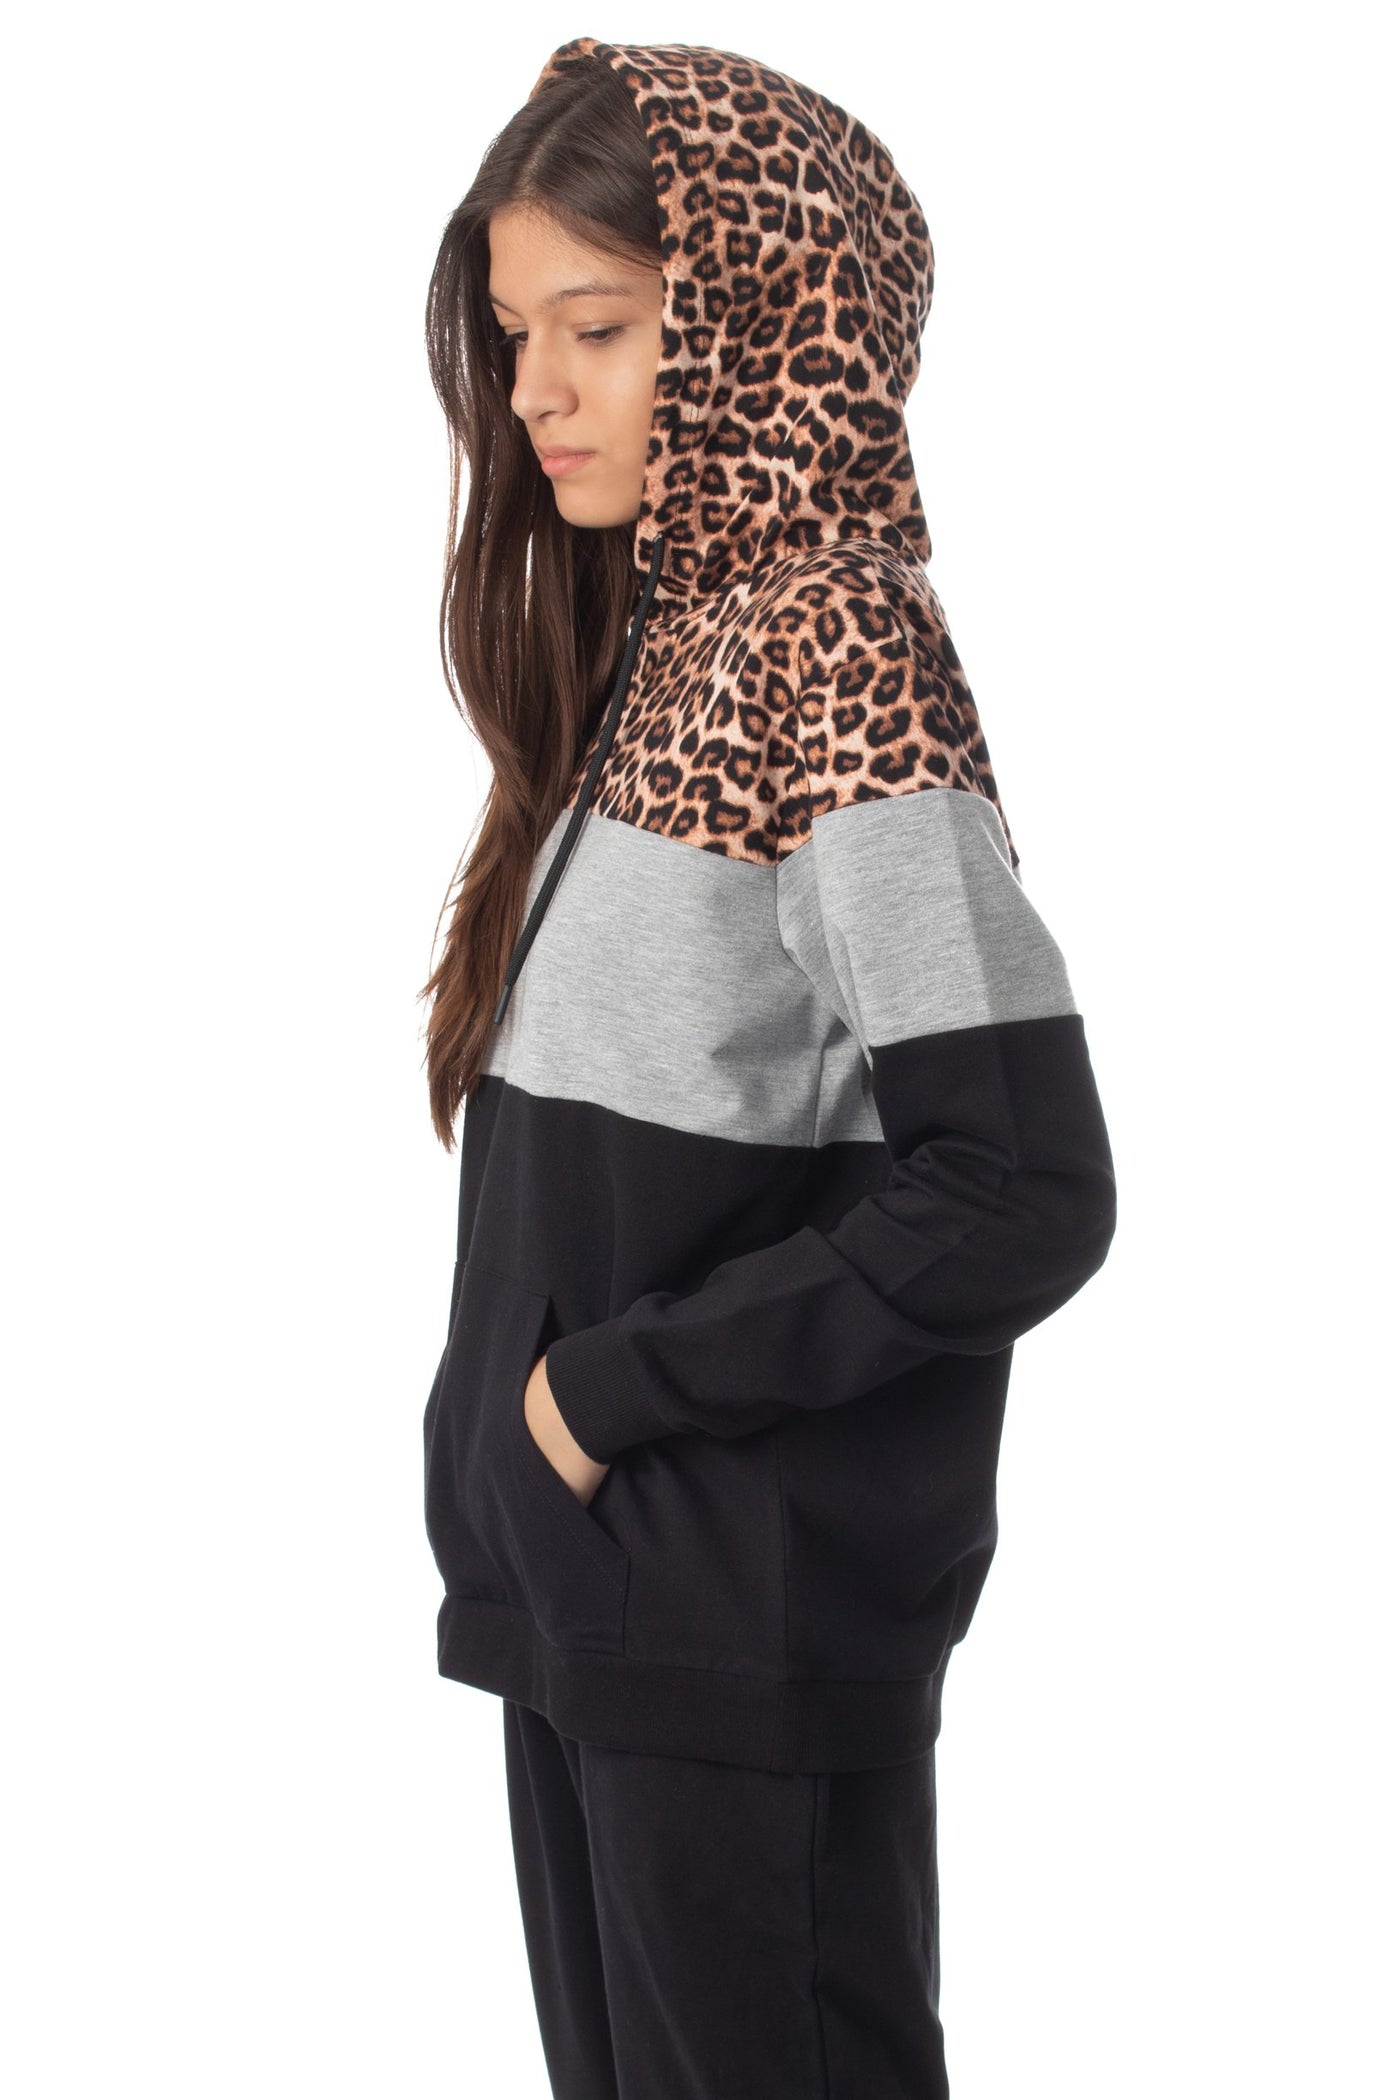 chassca 3 color leopard hoodie - Breakmood